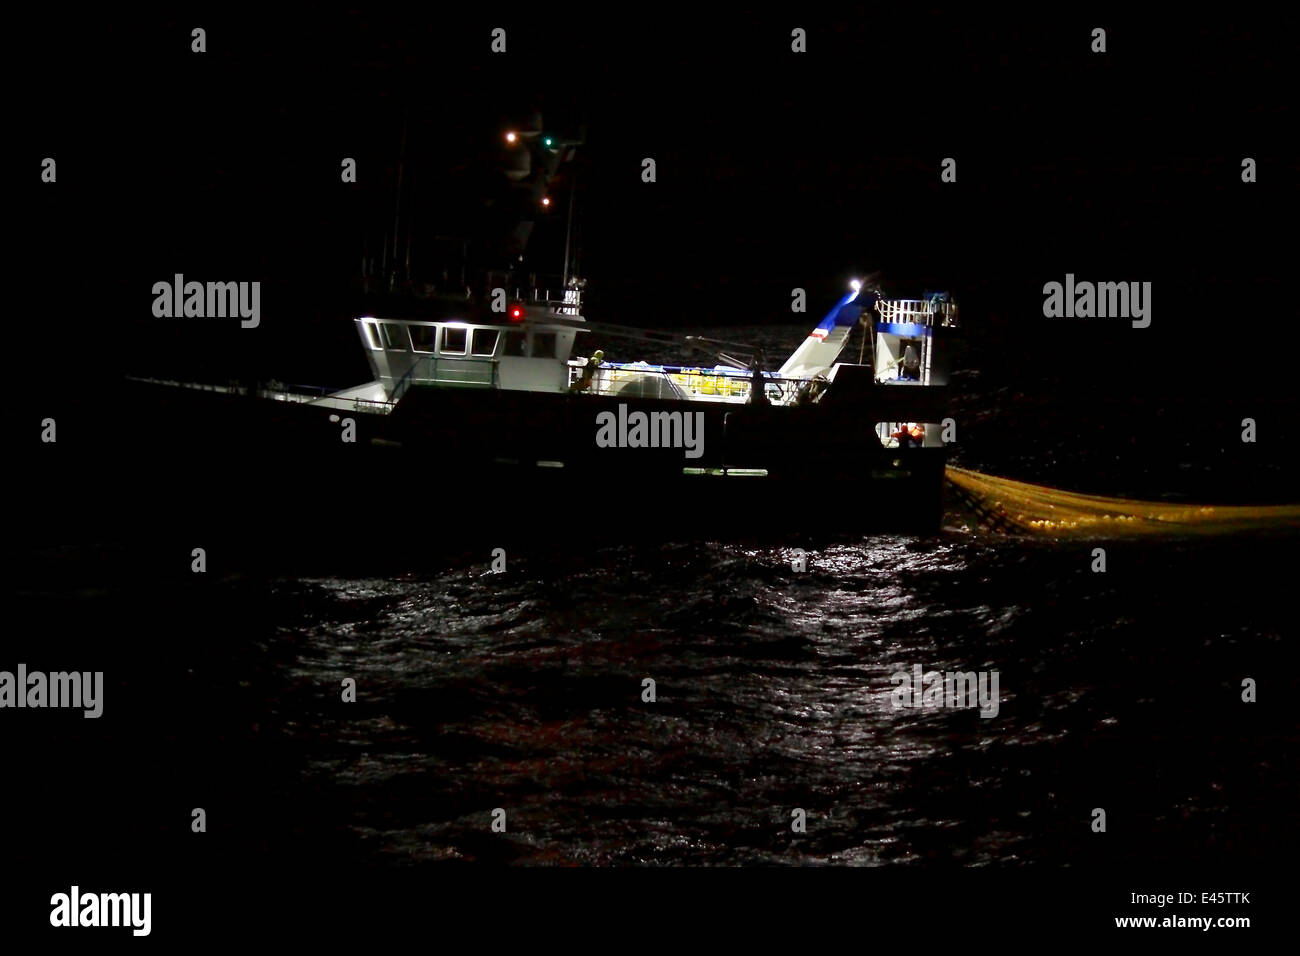 Trawler hauling net onboard during night fishing. September 2010. Property released. Stock Photo